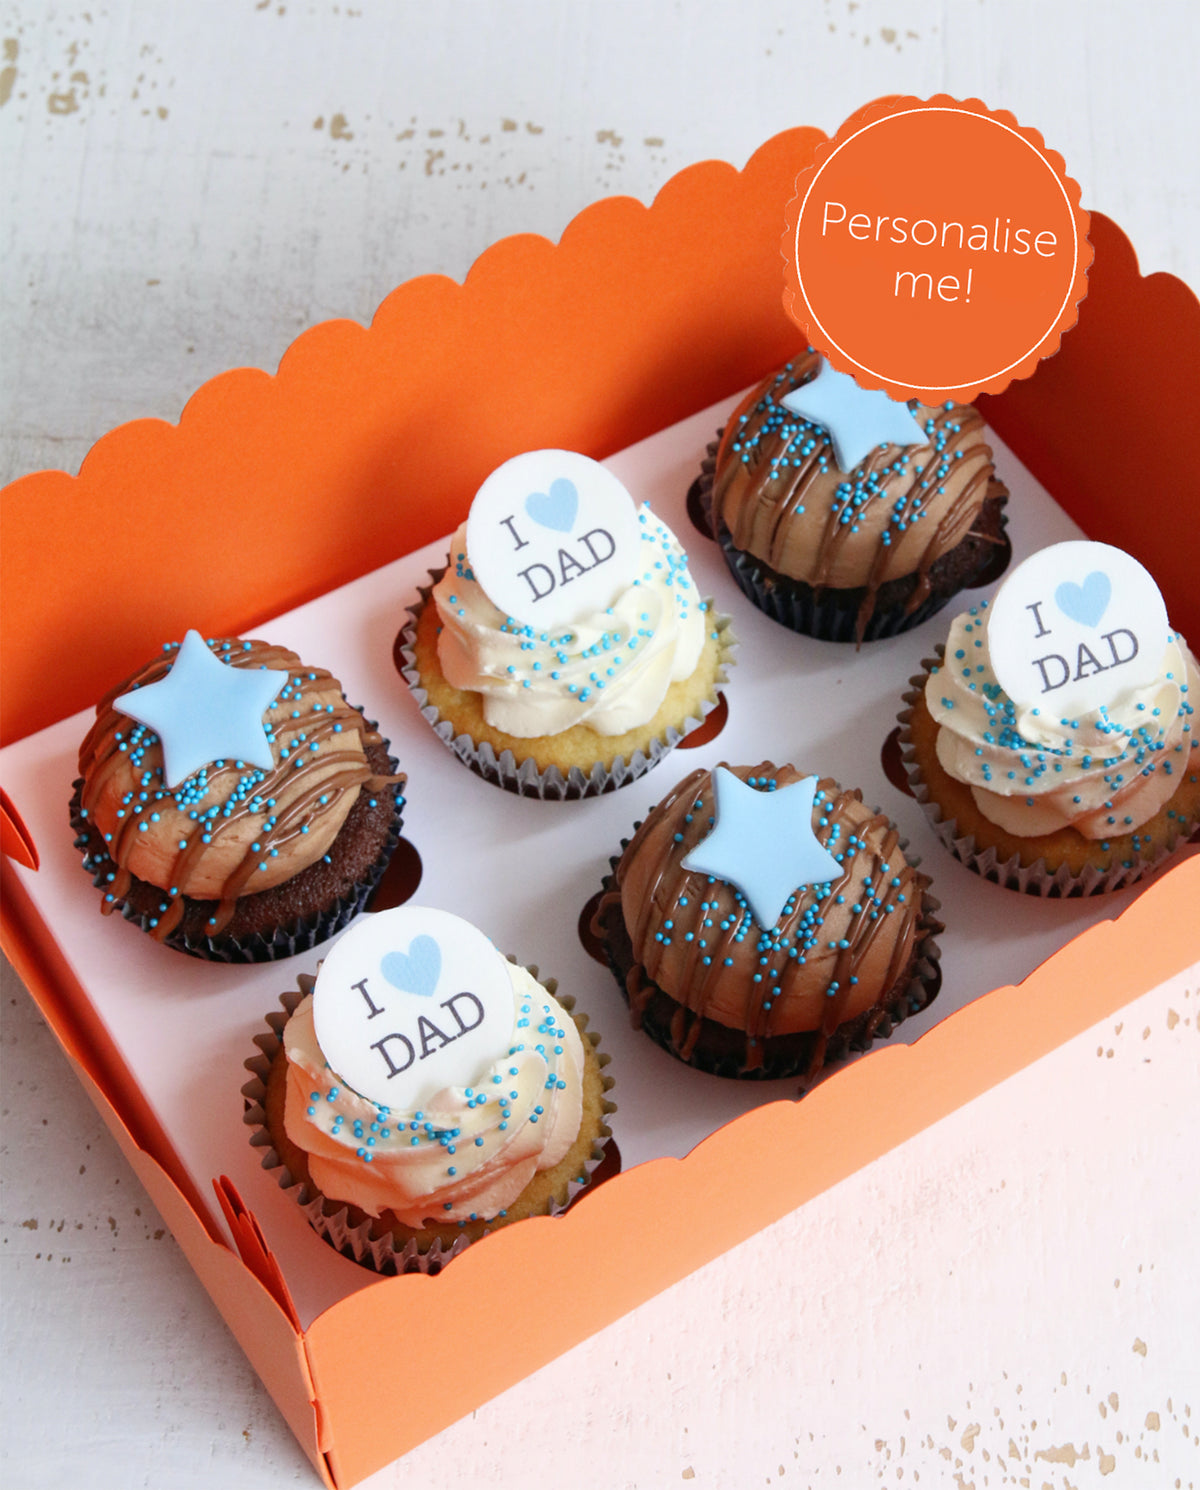 I Heart Dad & Stars Father's Day Cupcakes Personalise Me